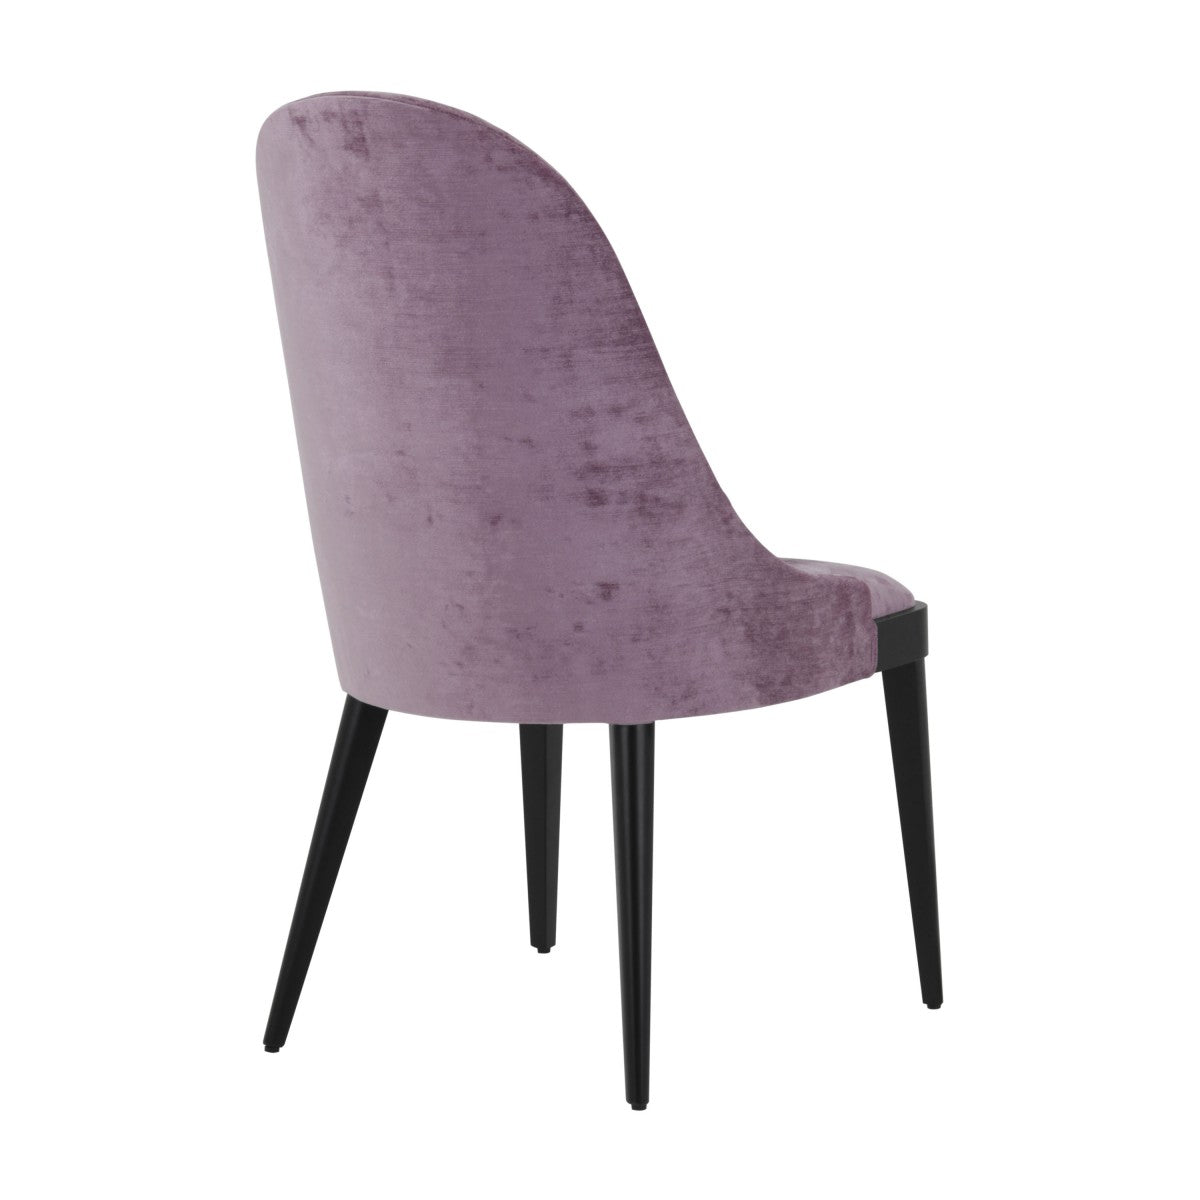 Svezia Bespoke Upholstered Modern Contemporary Dining Chair MS226S Custom Made To Order